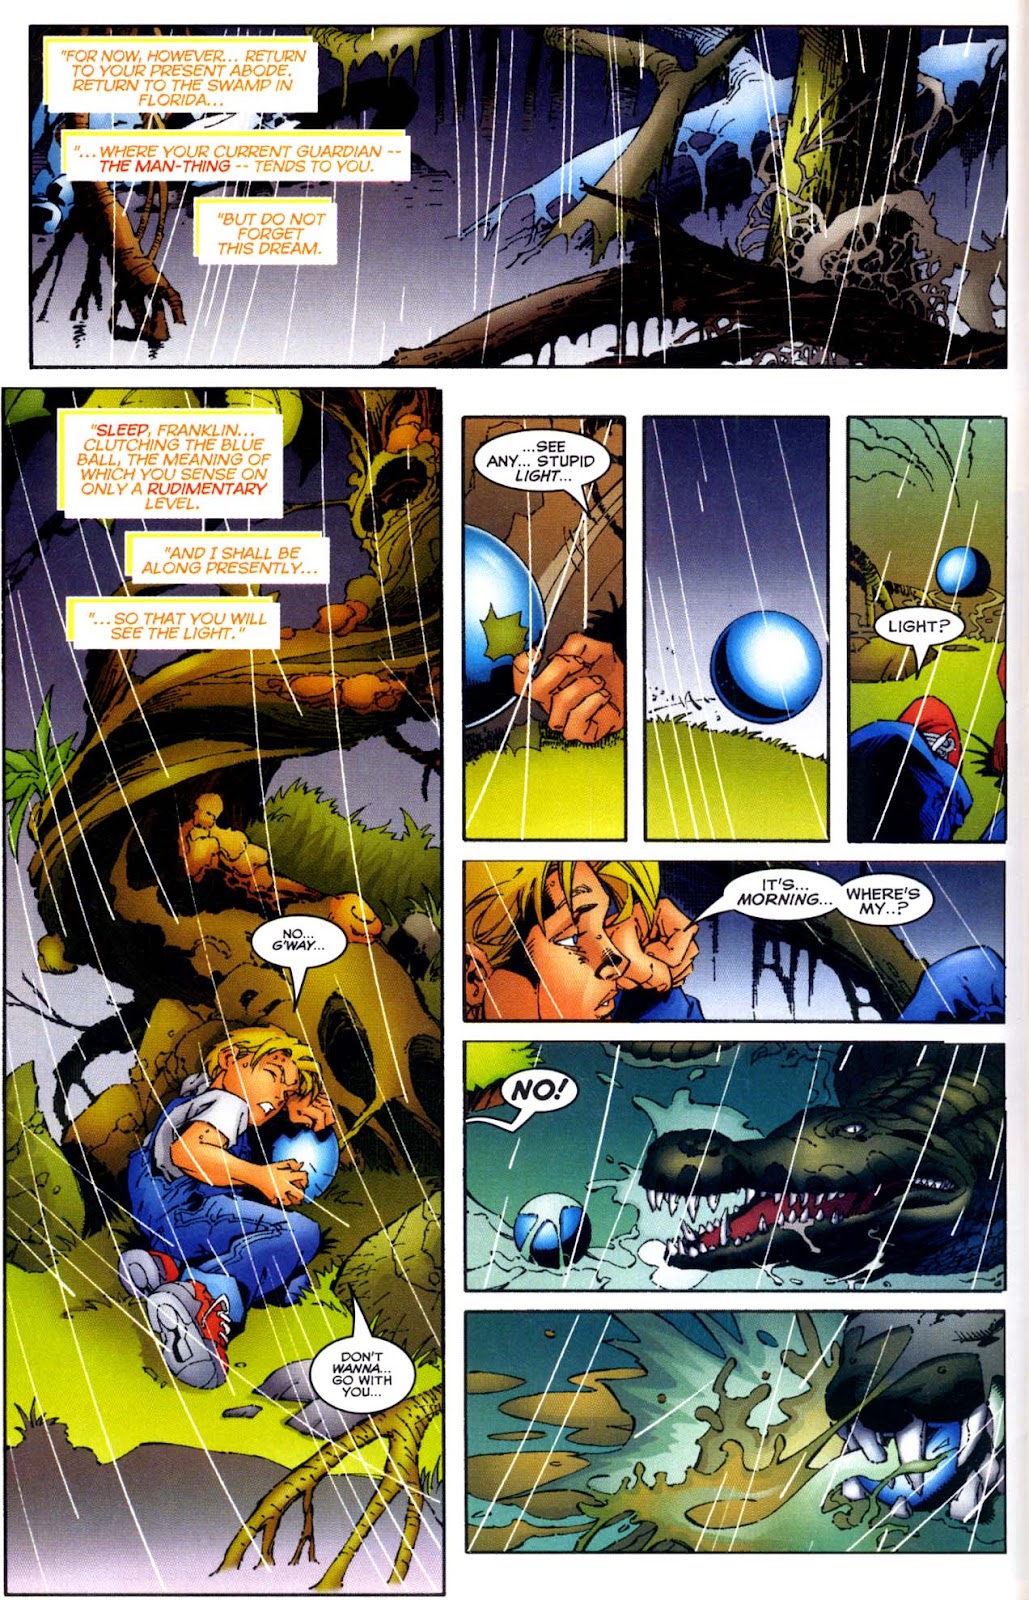 Heroes Reborn: The Return issue 1 - Page 11